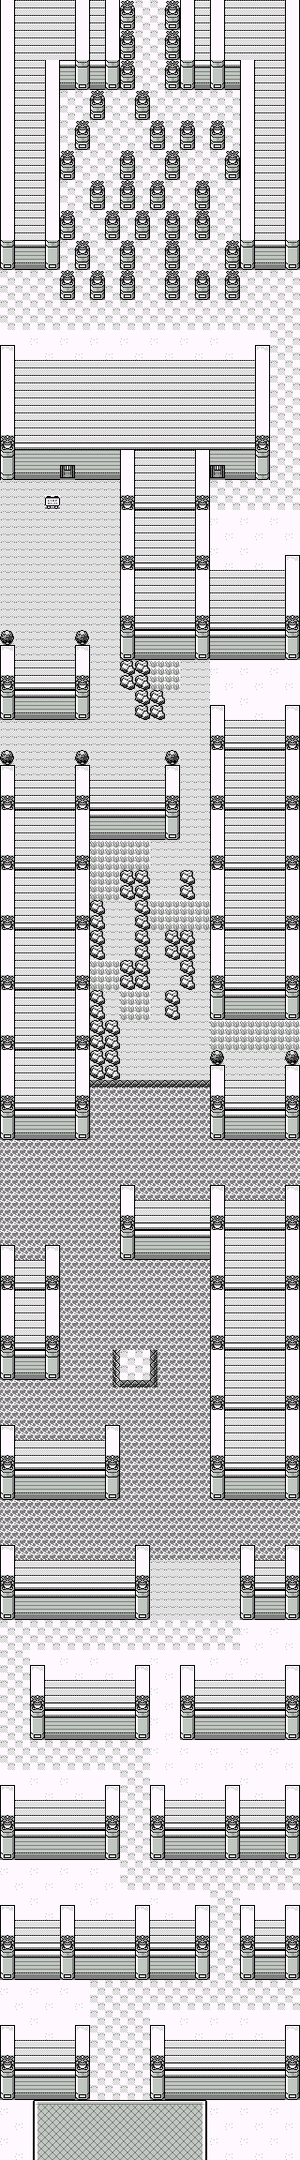 Route 23 (Kanto) RBJ.png